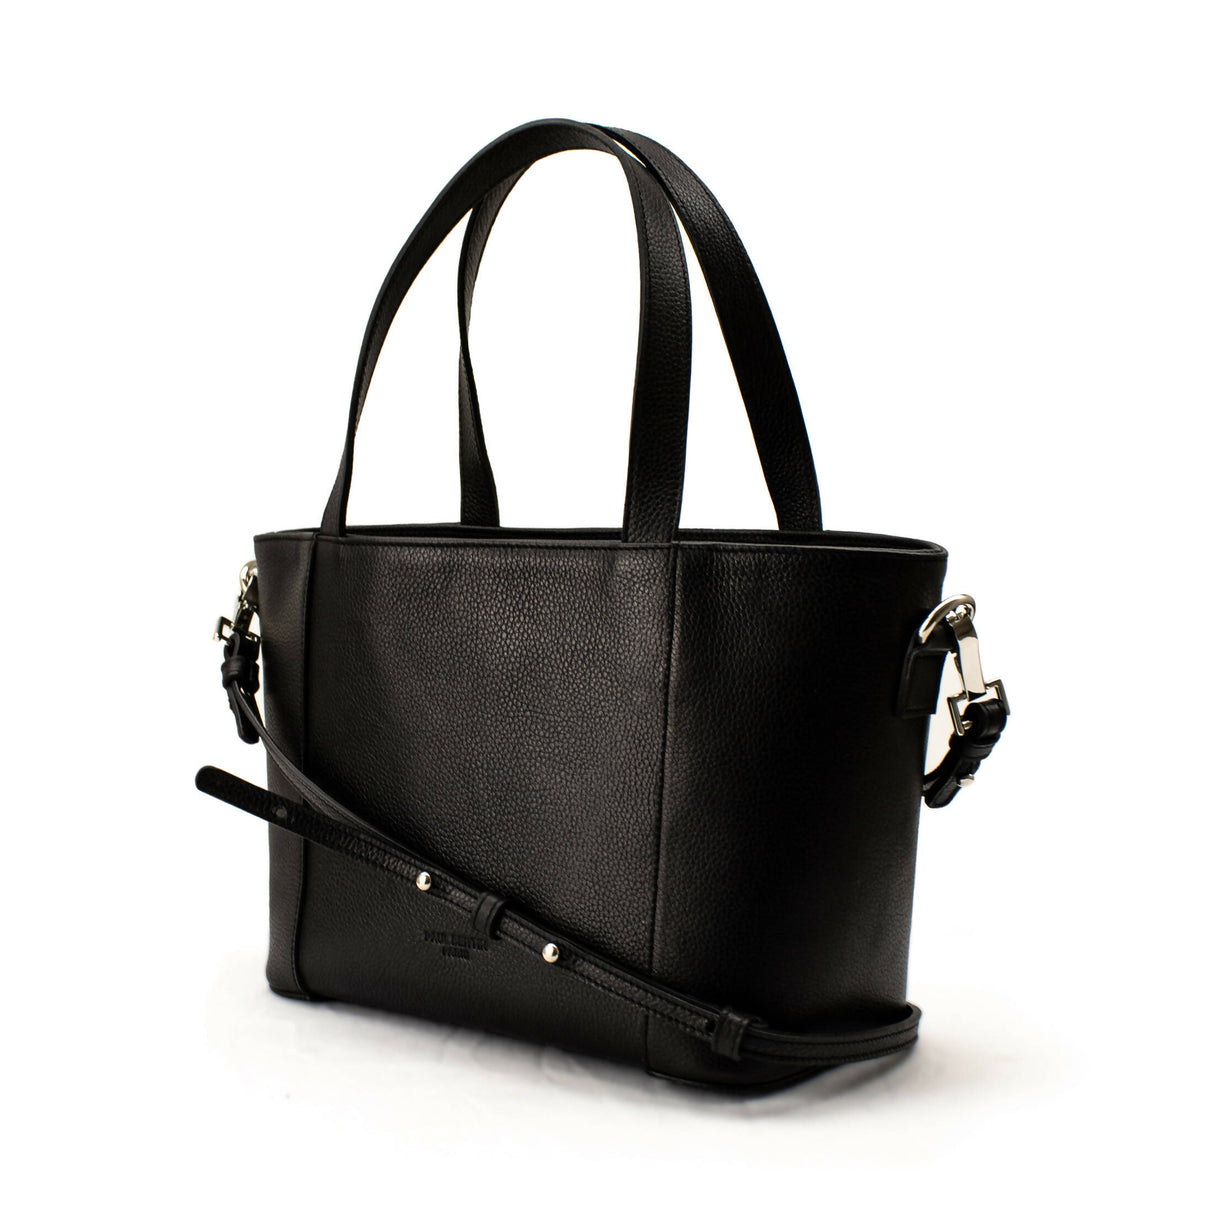 Suzanne S - Grained Black Leather Tote Bag